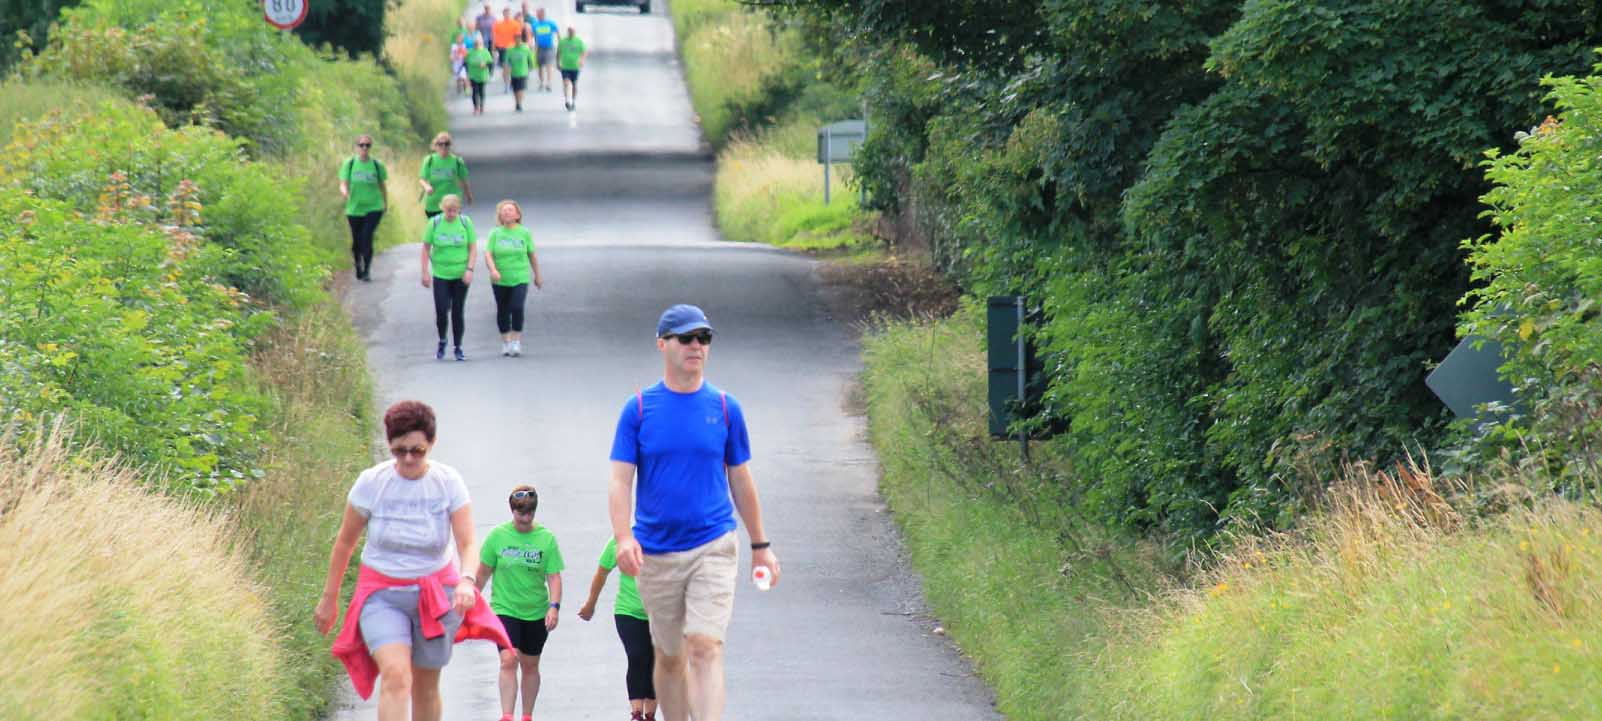 Featured image for “Offaly Camino Canal Way Walk”